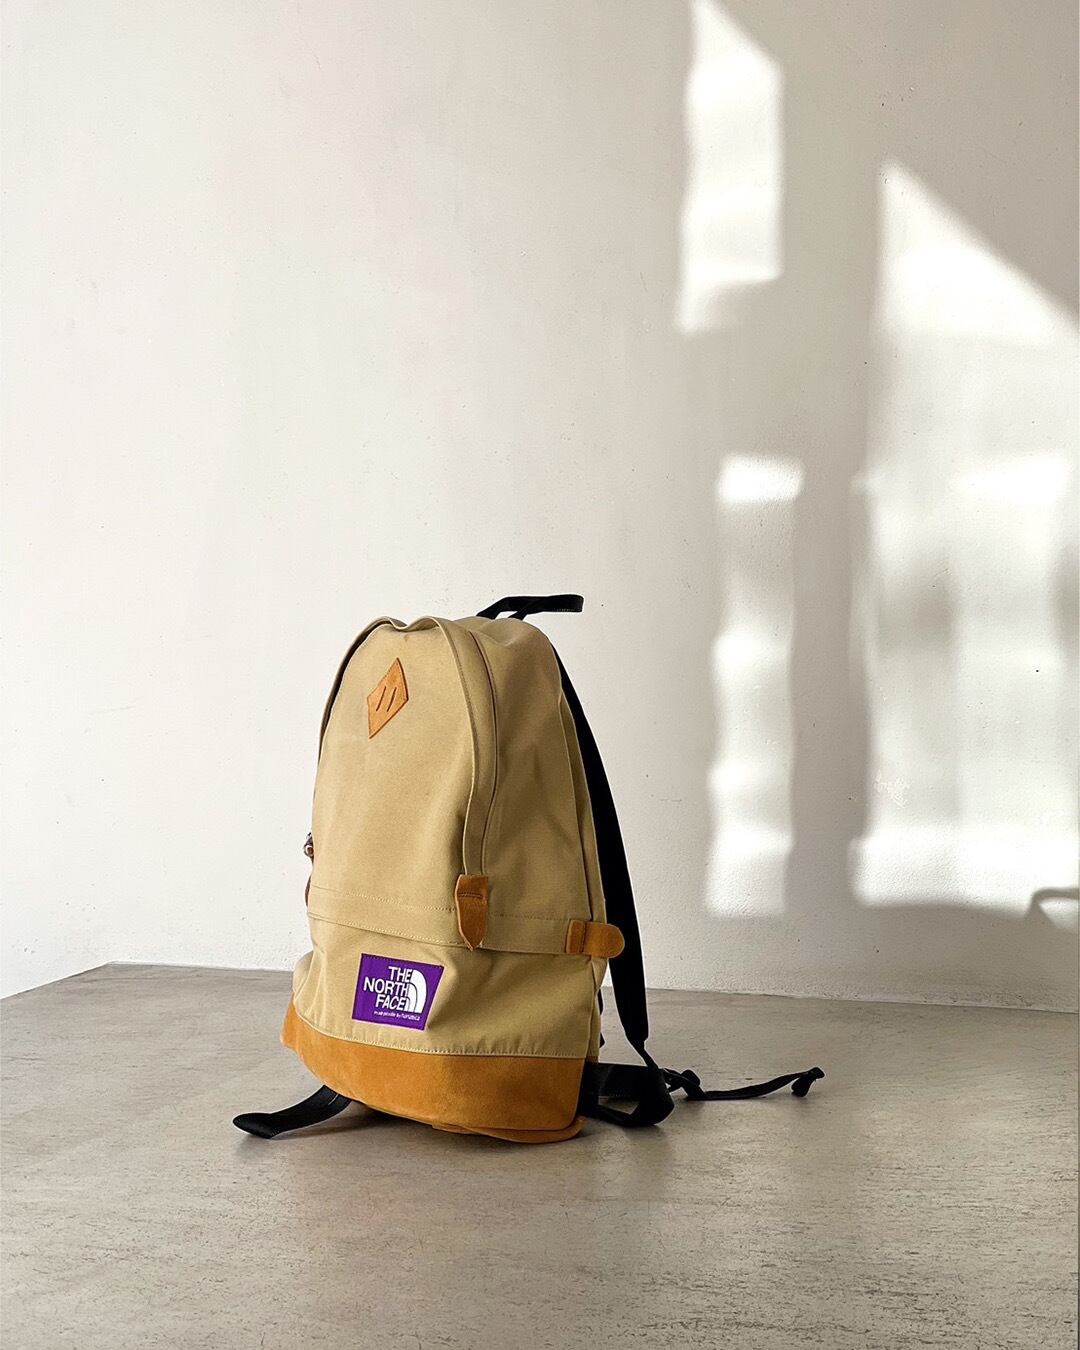 THE NORTH FACE Medium Day Pack Peach